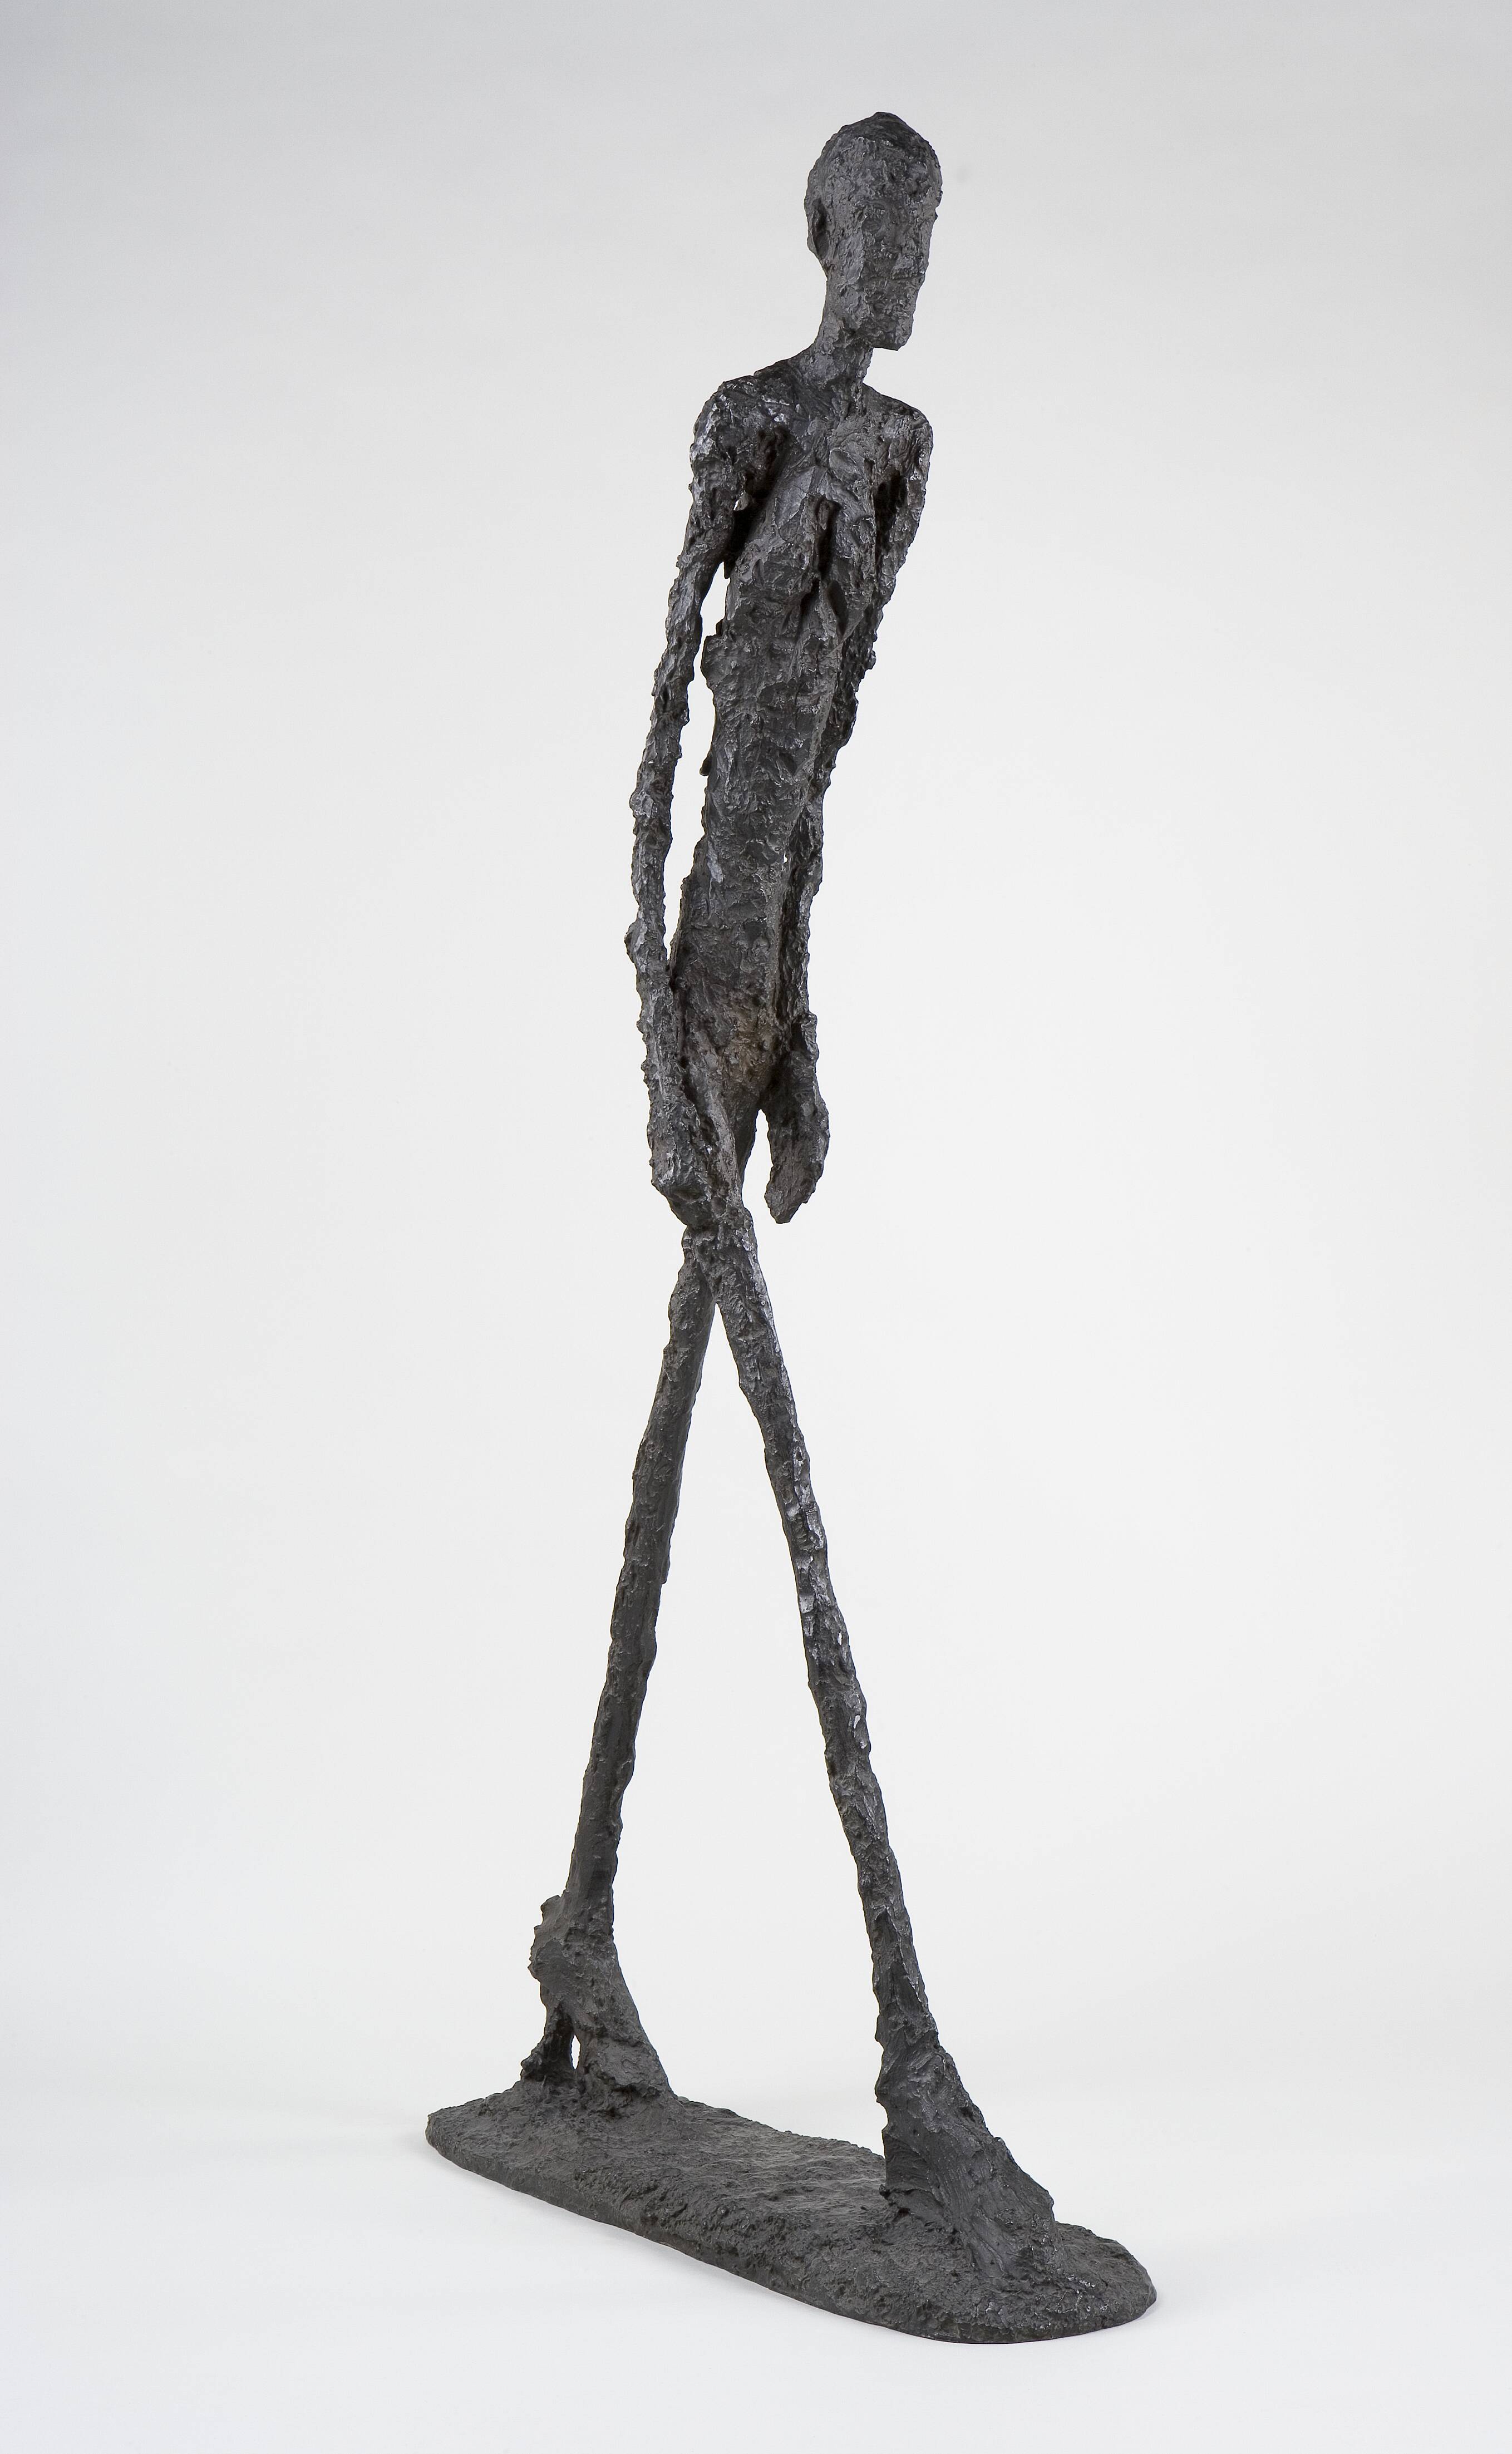 Opening Day Lecture | “Alberto Giacometti: Toward the Ultimate 